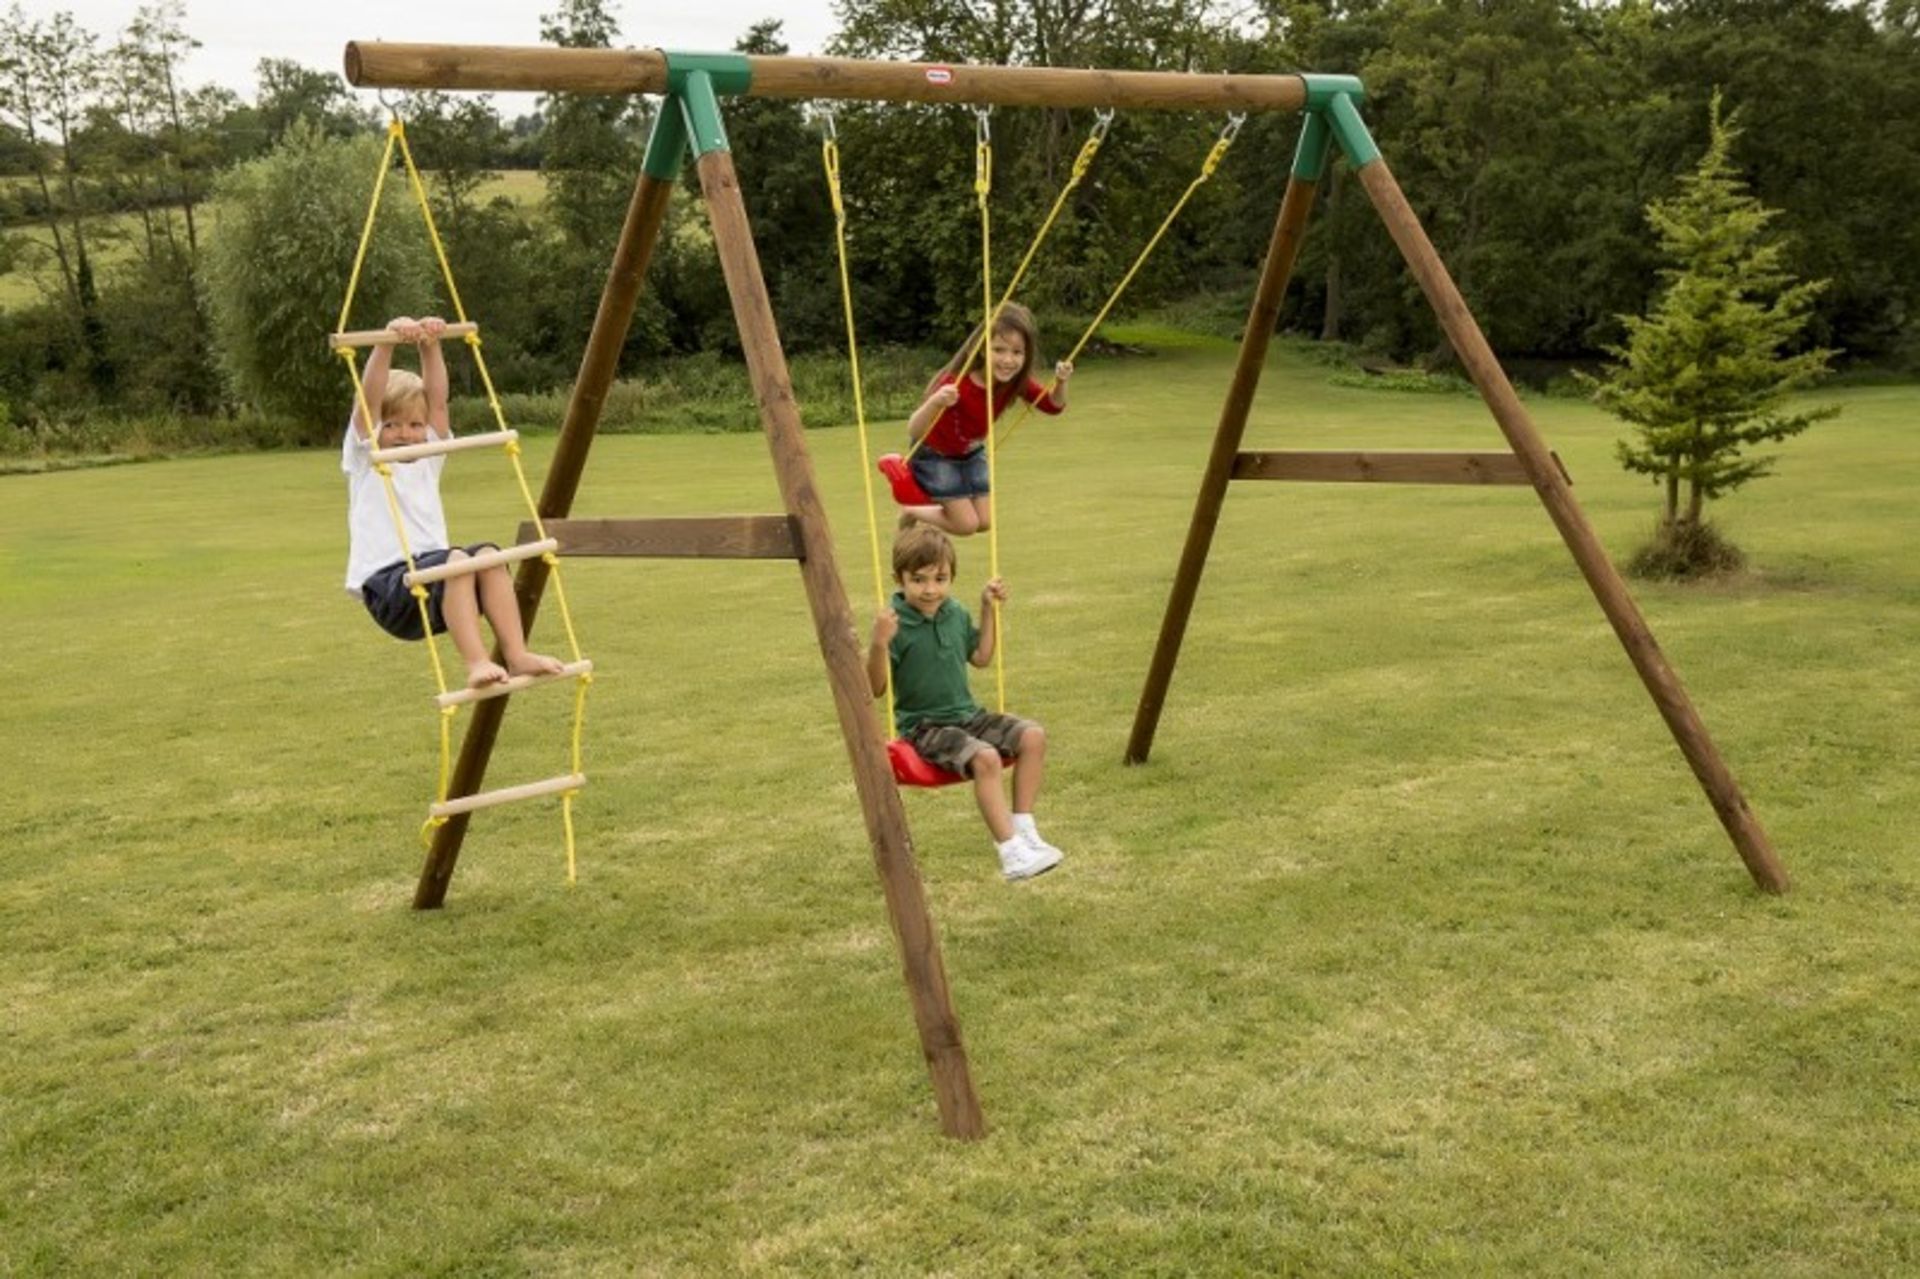 1 x Little Tikes Riga Swing Set with Ladder. RRP £319.99. This wooden play system will provide hours